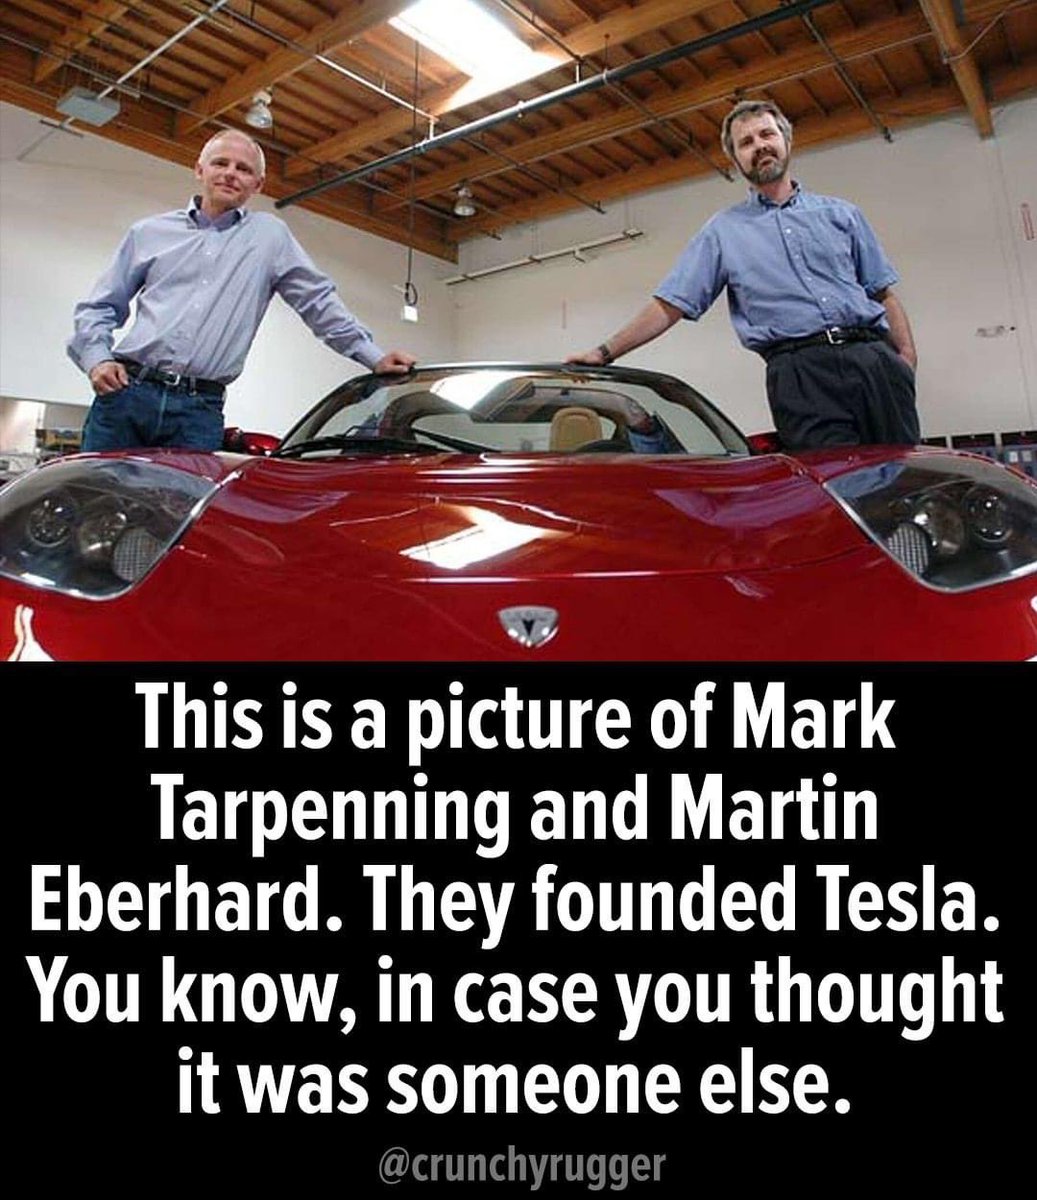 It’s always worth reminding Musk’s fan boys that these are the brilliant men who founded Tesla. Elon was just a series-A investor who bought in, then sabotaged the company enough until these men were pushed out, then he spent the next ten years telling everyone he founded Tesla.